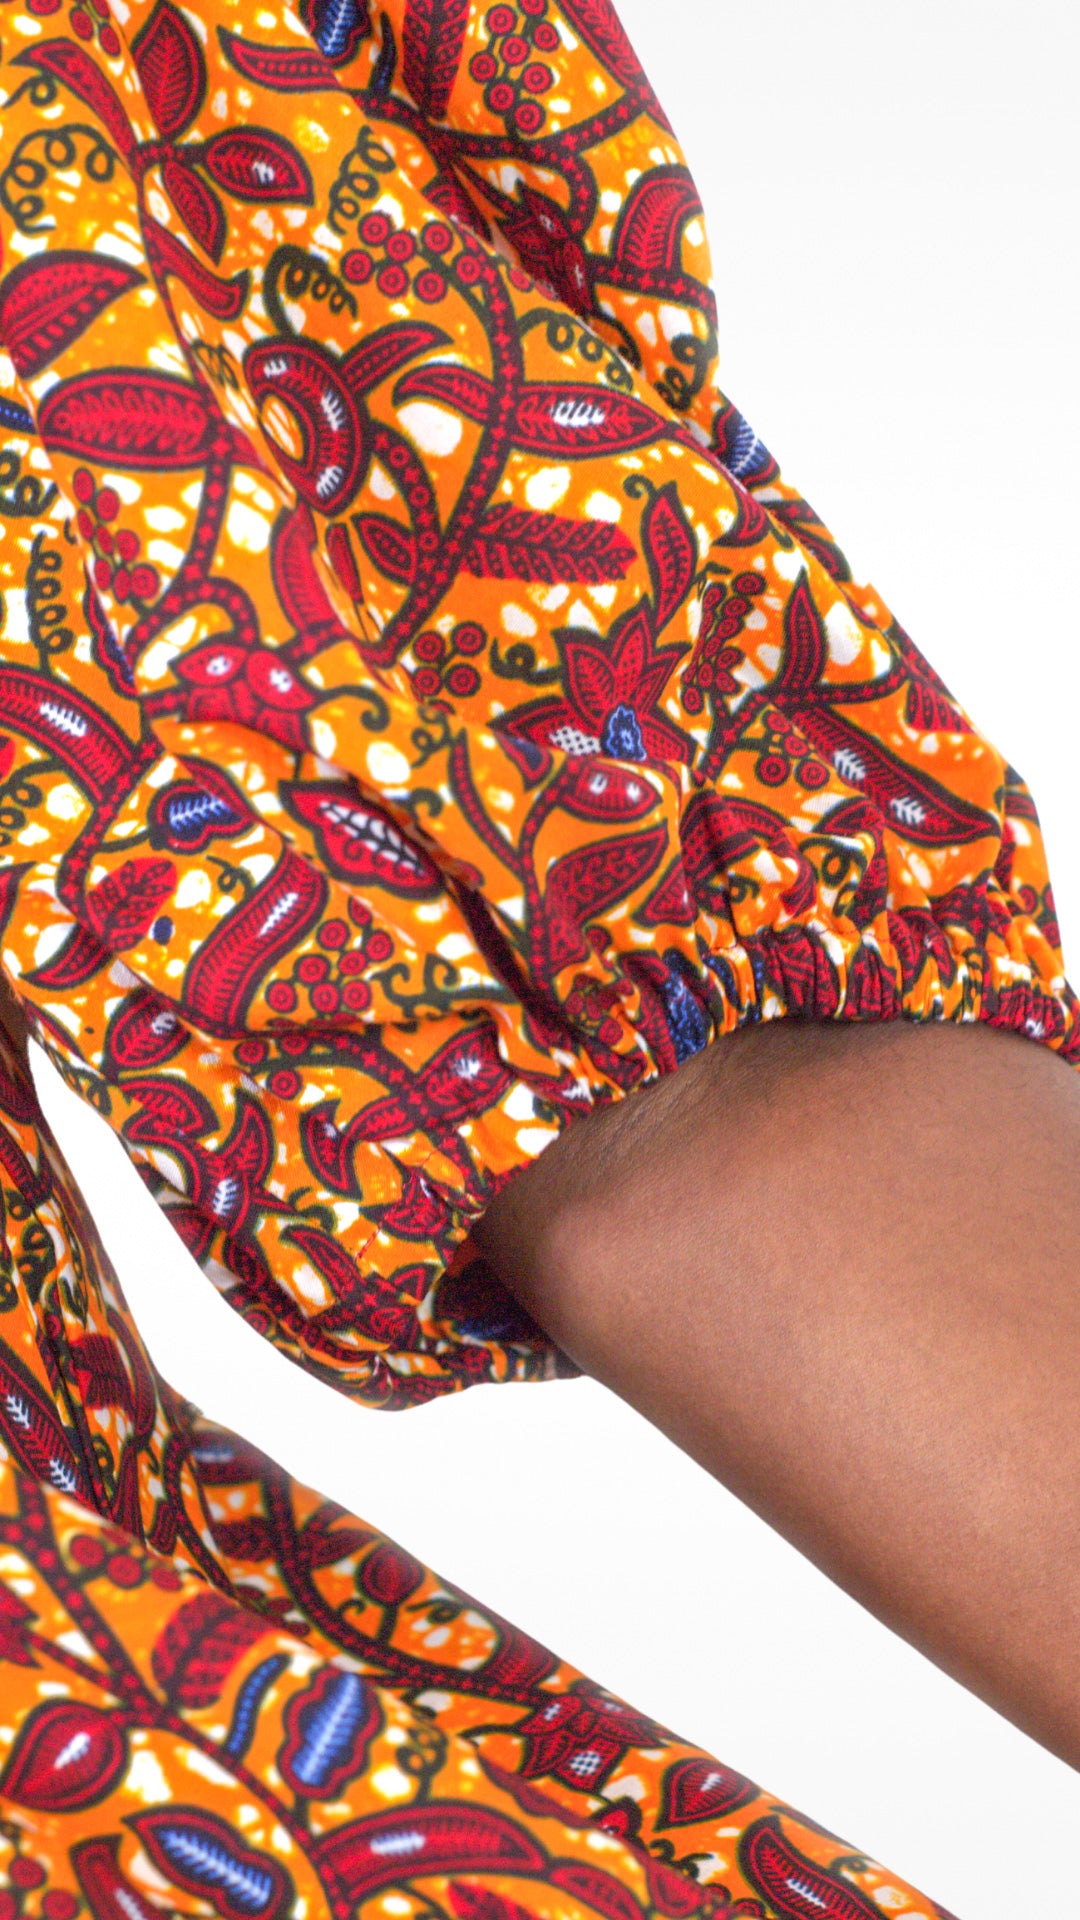 A close-up view highlighting the charming puff sleeve and detailed floral elements of the orange dress.